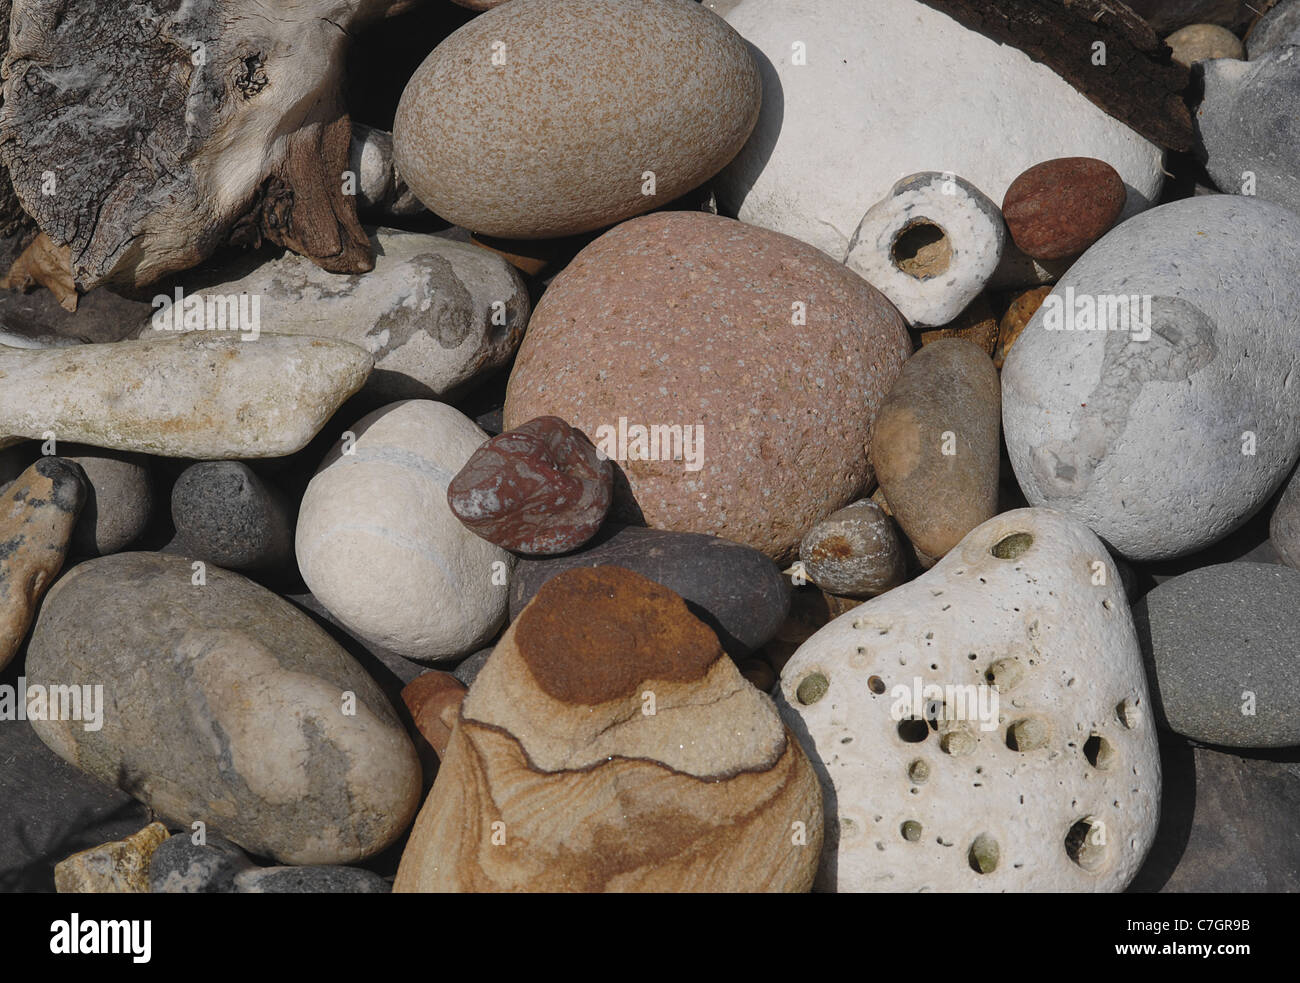 Group of various pebbles and stones taken in warm sunlight. Stock Photo